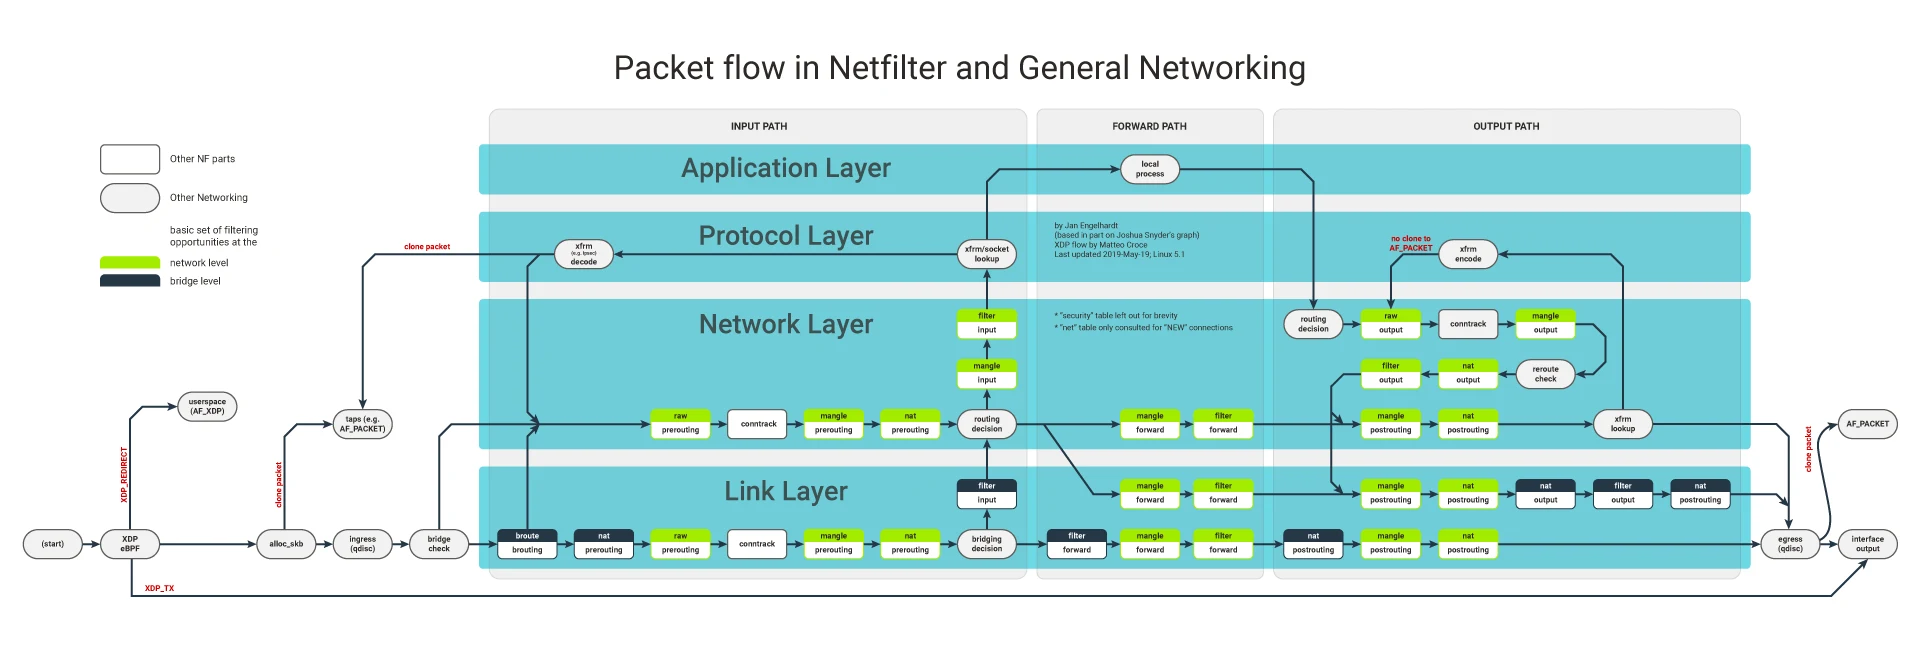 packet flow in Netfilter and General Networking